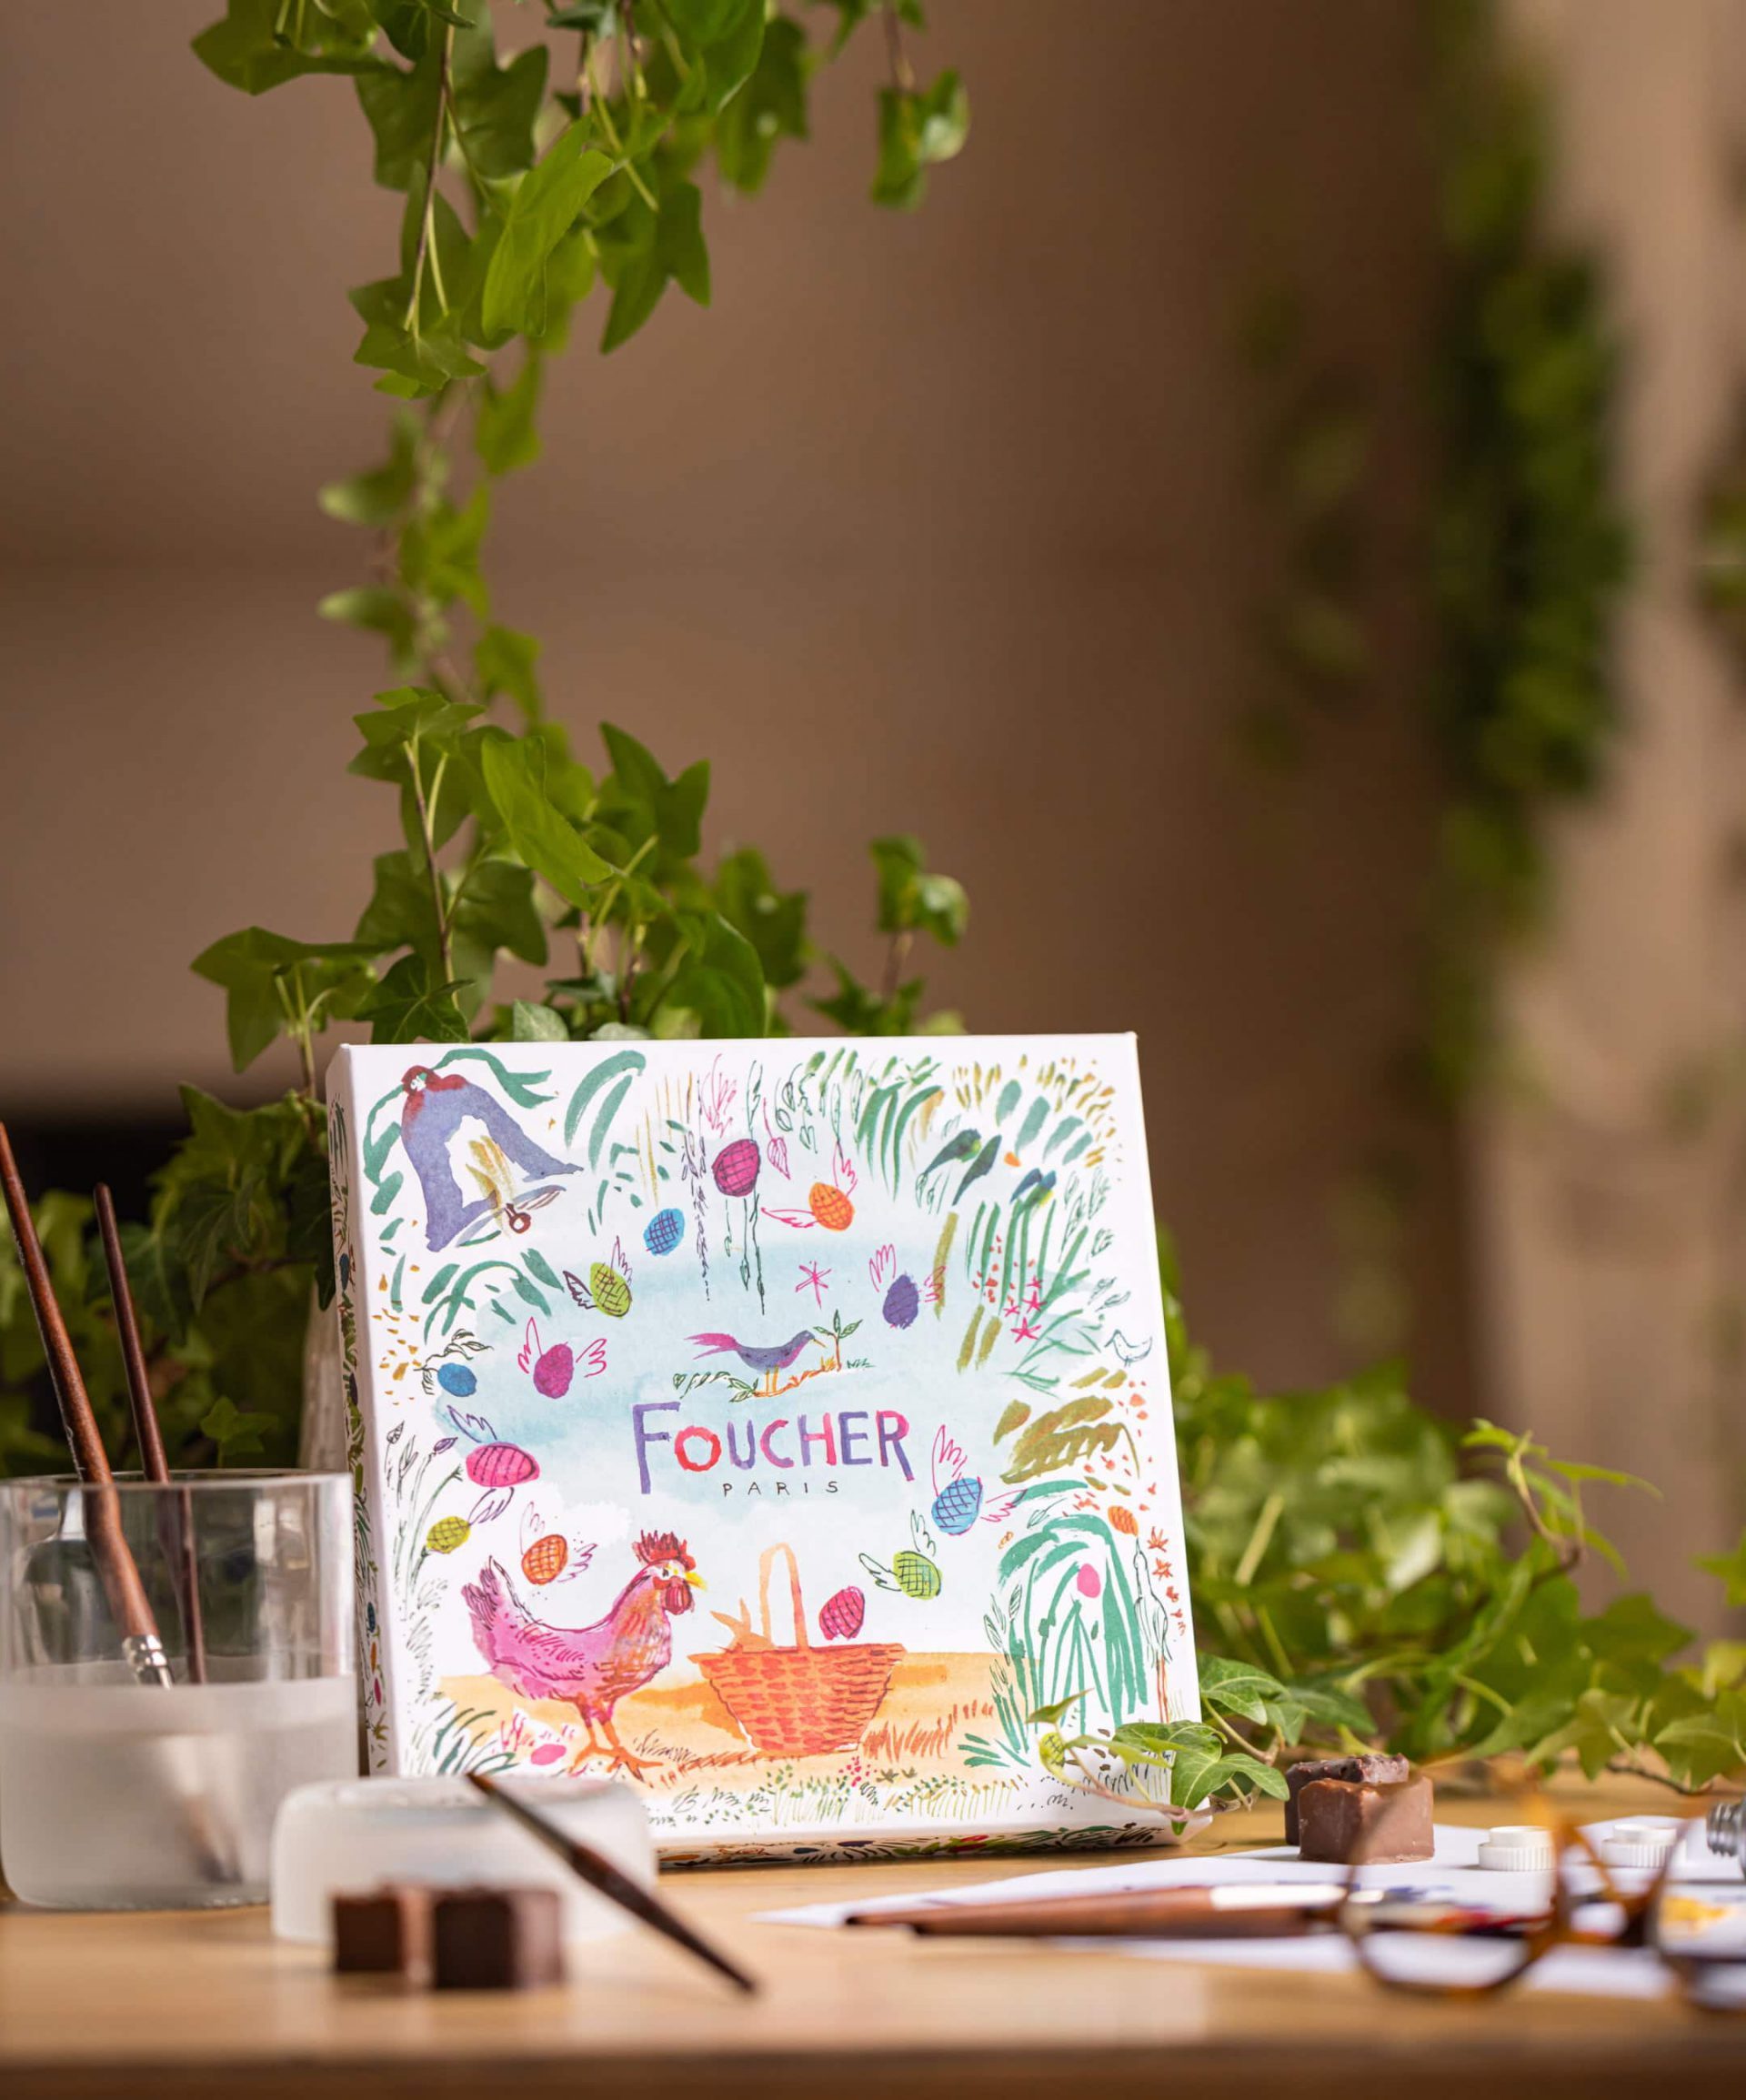 Box on the table with vegetal and painting decoration